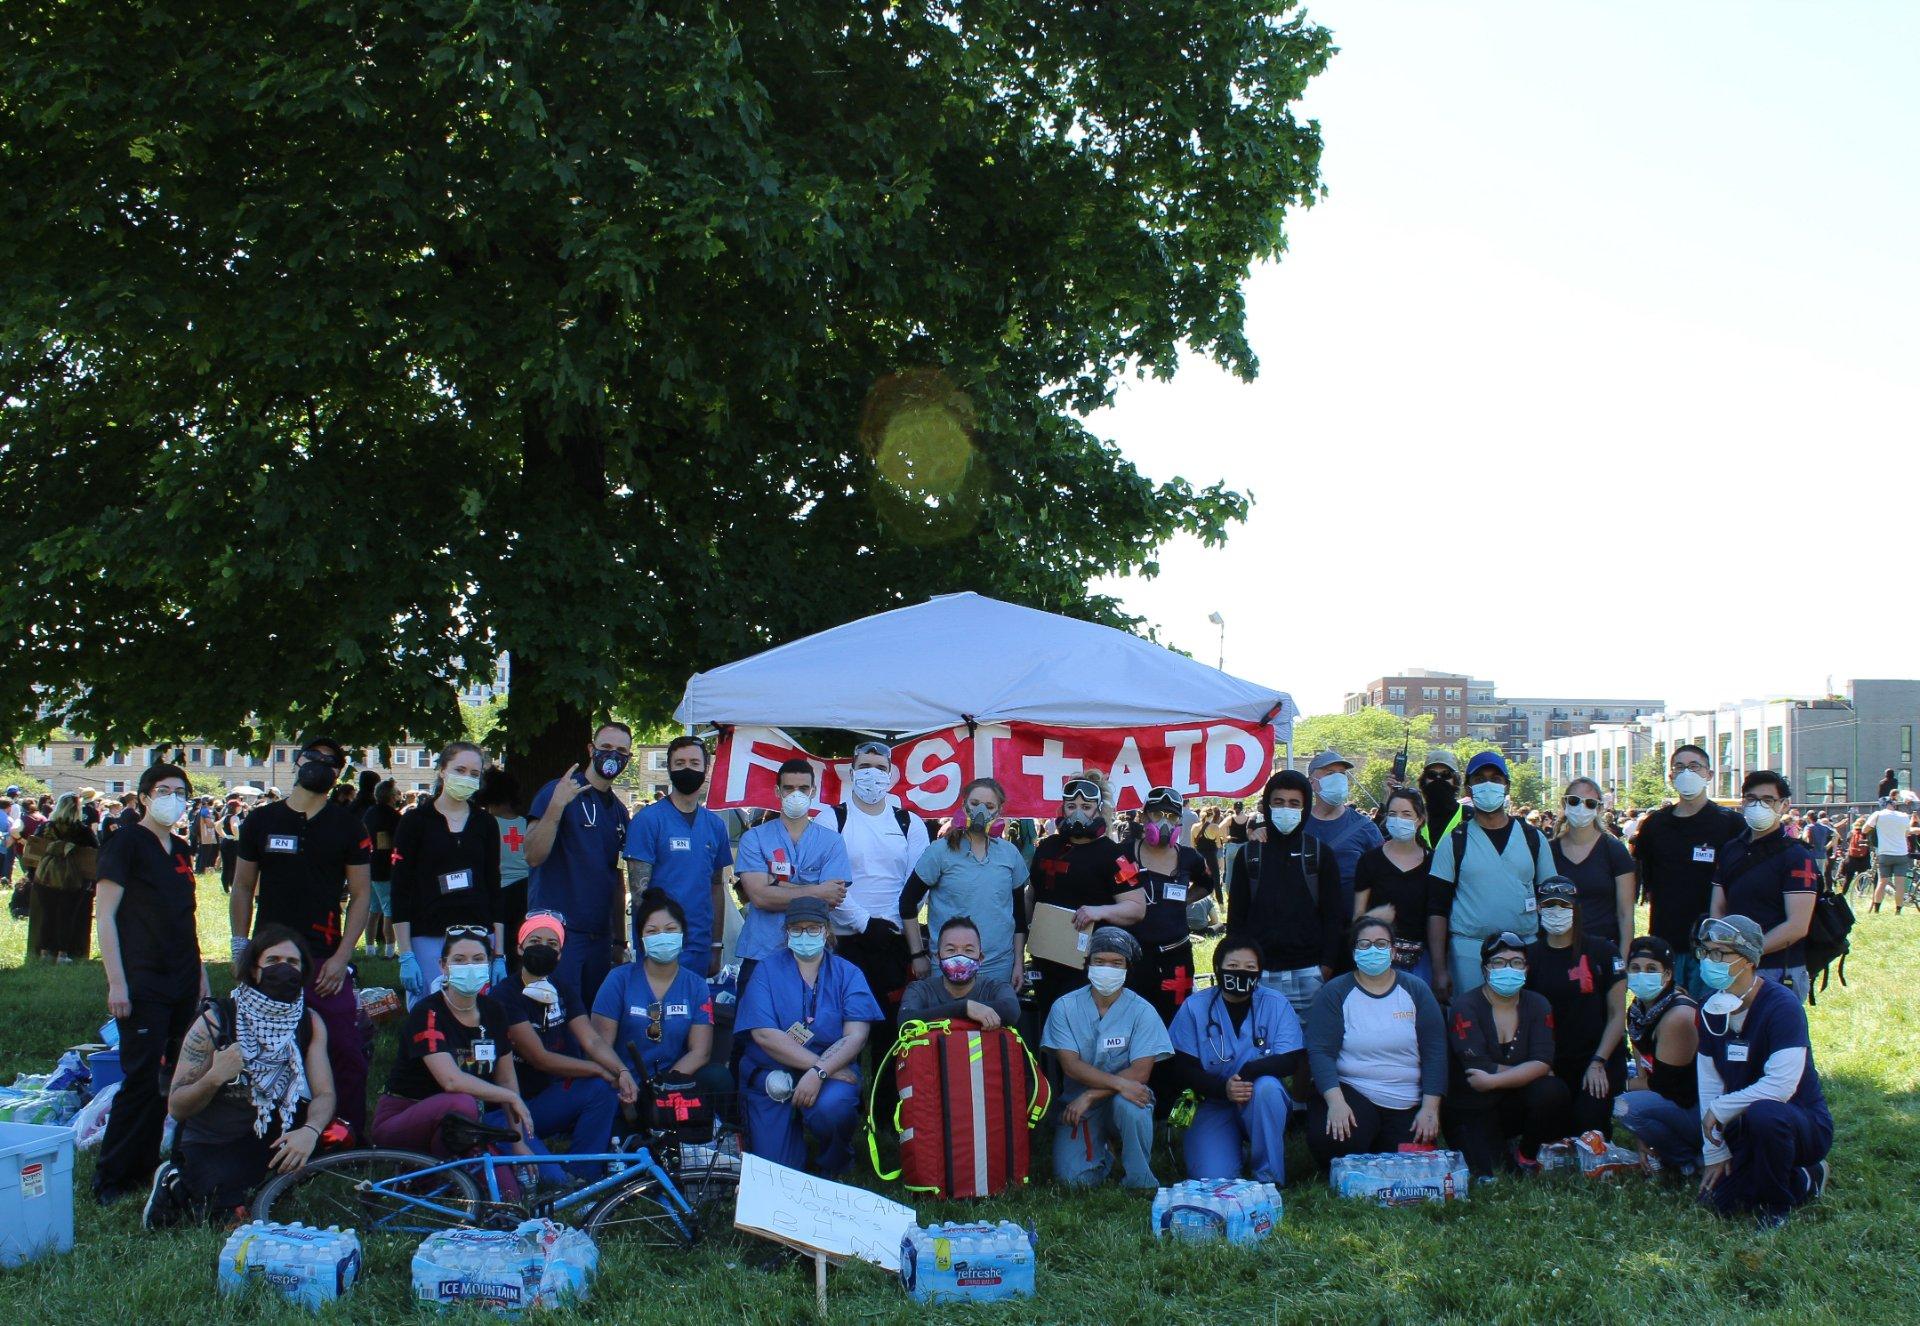 Health care workers volunteering as street medics set up a first aid tent during a rally held June 6, 2020 in Union Park. (Courtesy Dakota Lane)